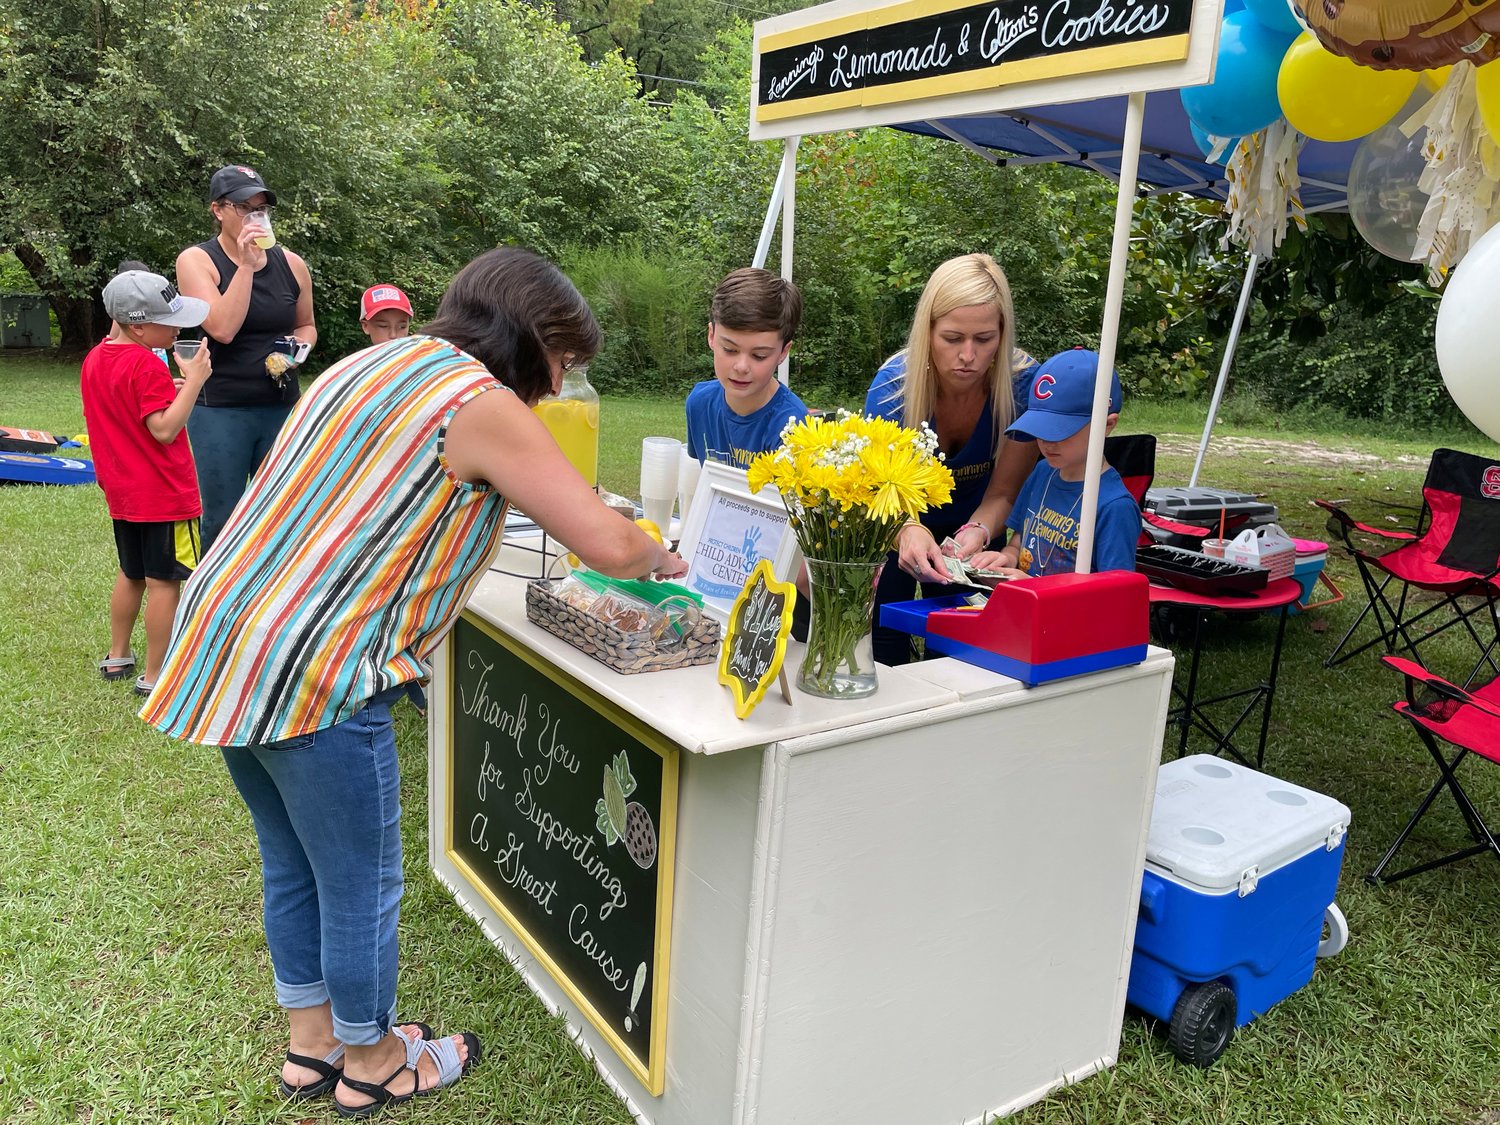 Customers visit Lanning's Lemonade & Colton's Cookies booth on Aug. 20. The fundraiser, in its fourth year, benefitted the Child Advocacy Center. It was the second year brothers Lanning Kistler and Colton Walters gave proceeds from the fundraiser to the organization.